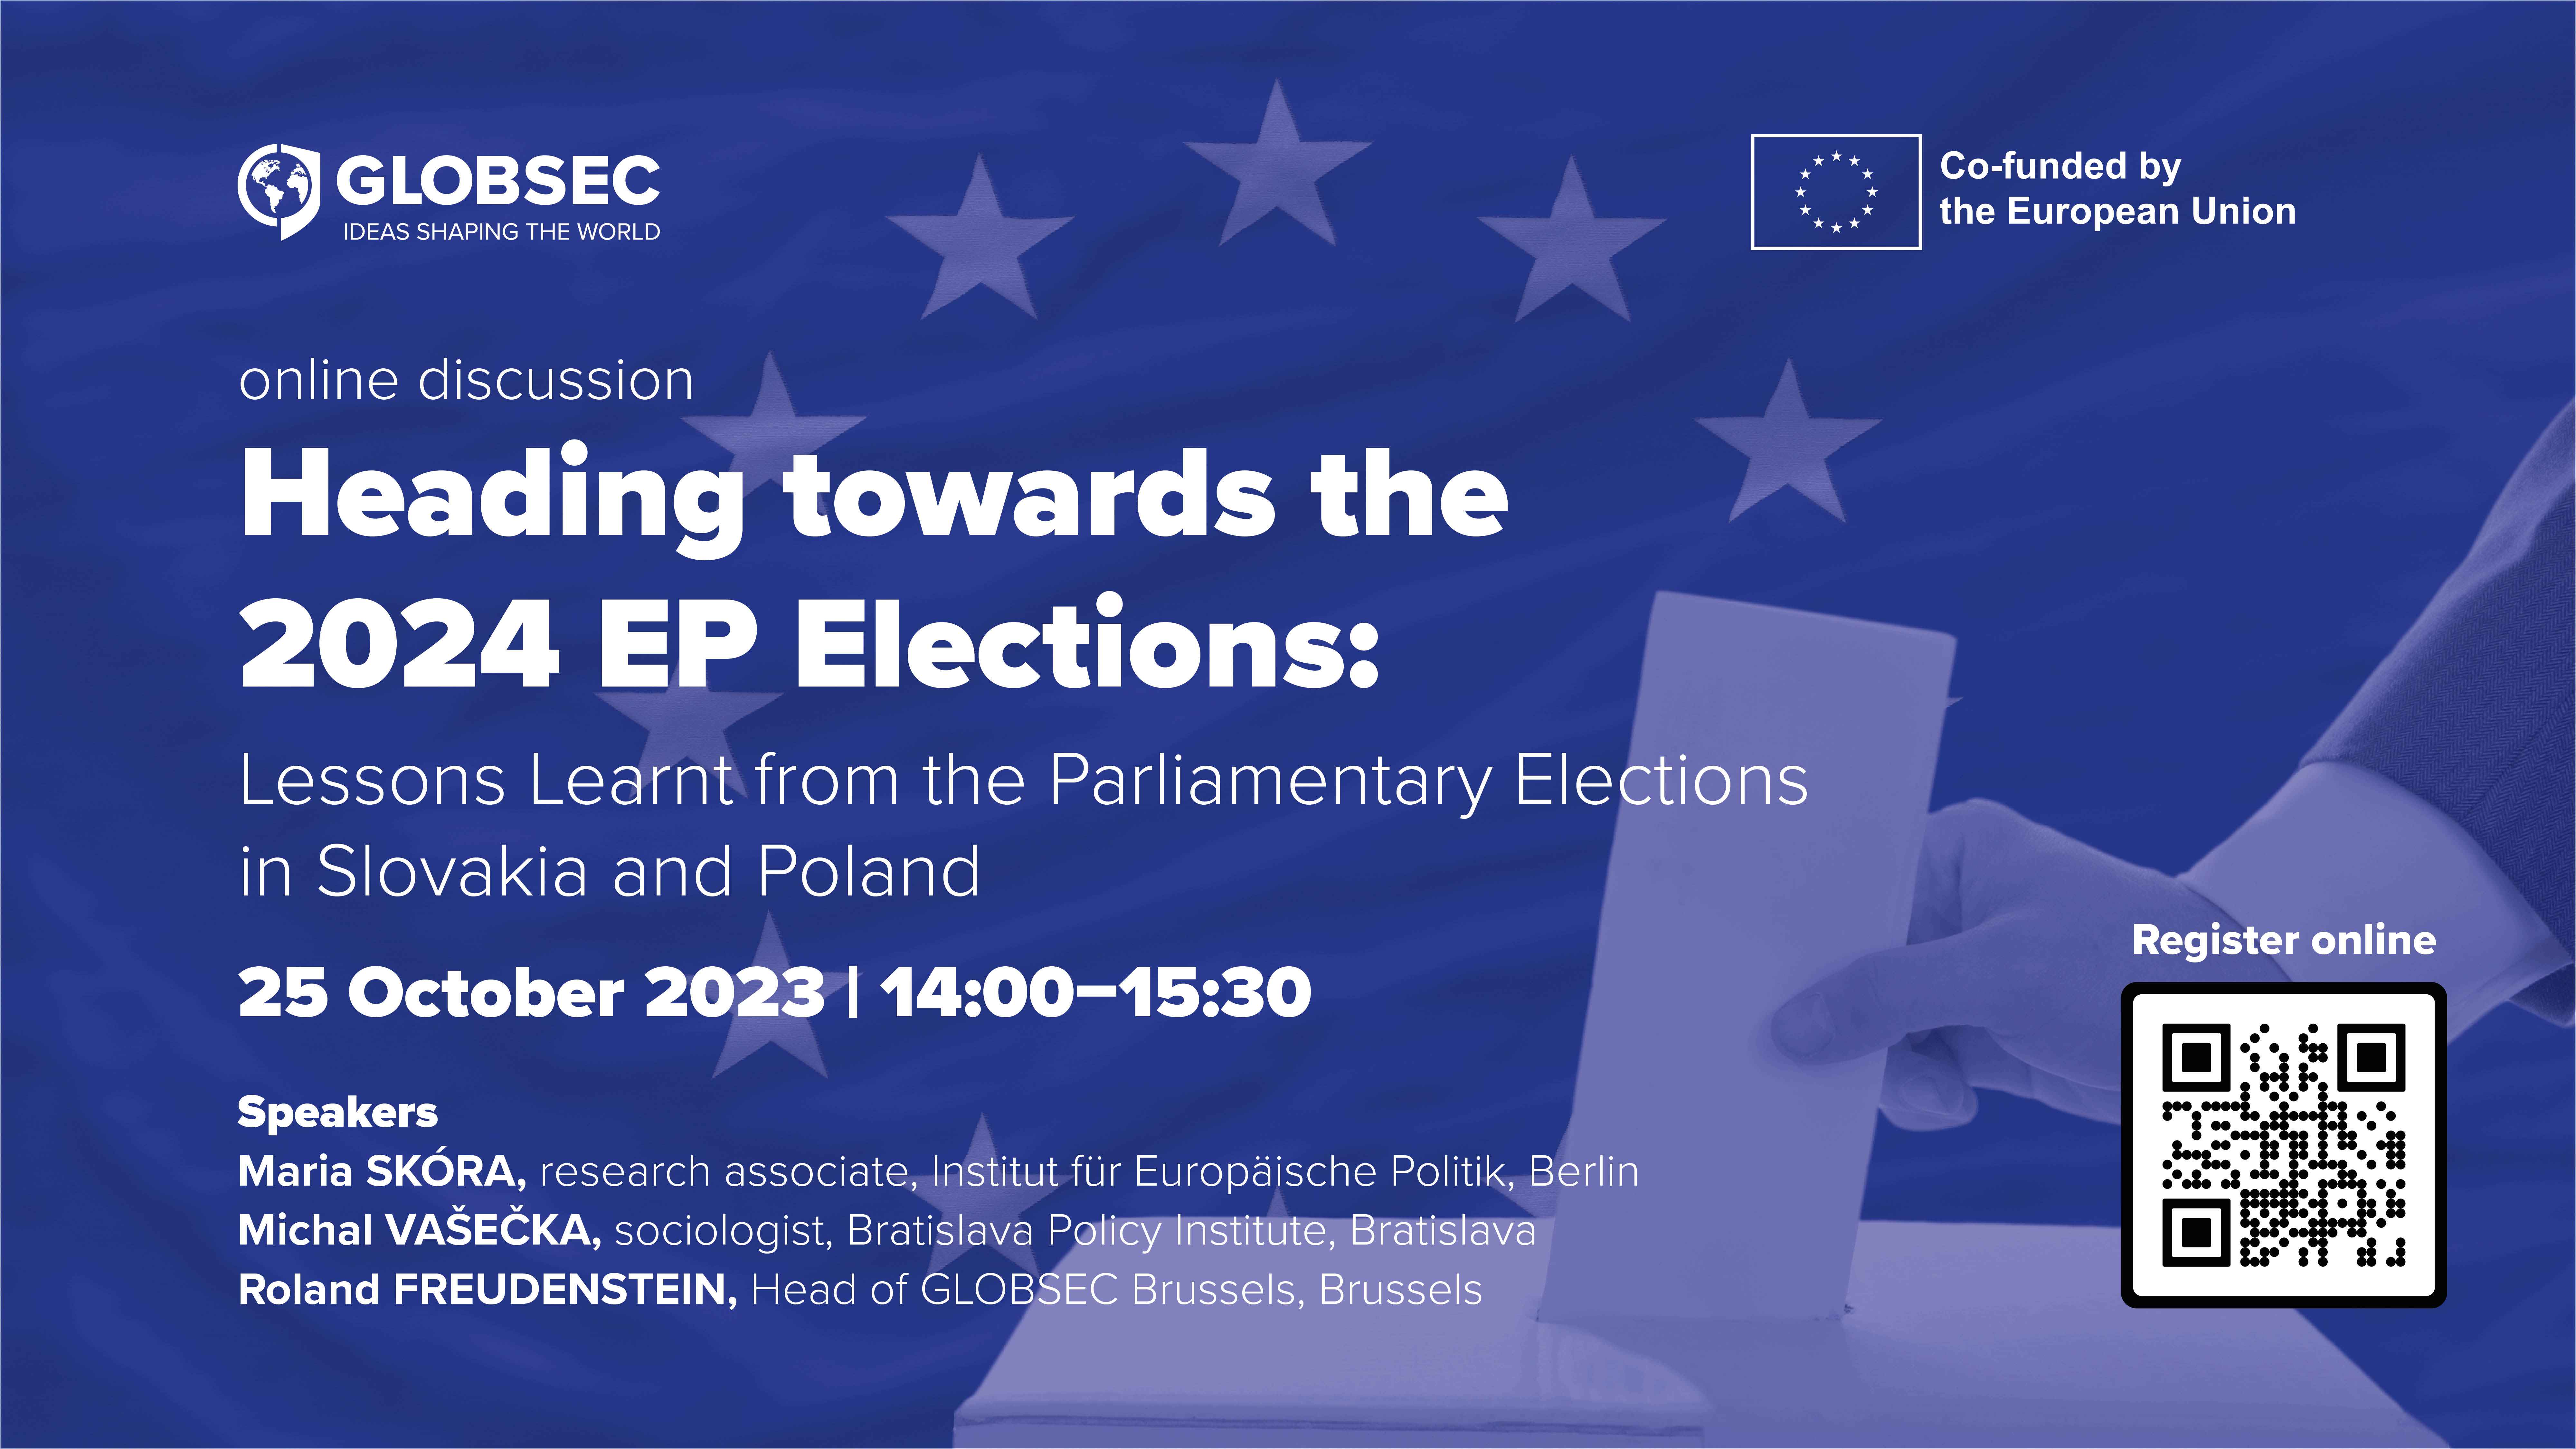 Event Summary “Heading towards the 2024 EP Elections Lessons Learnt